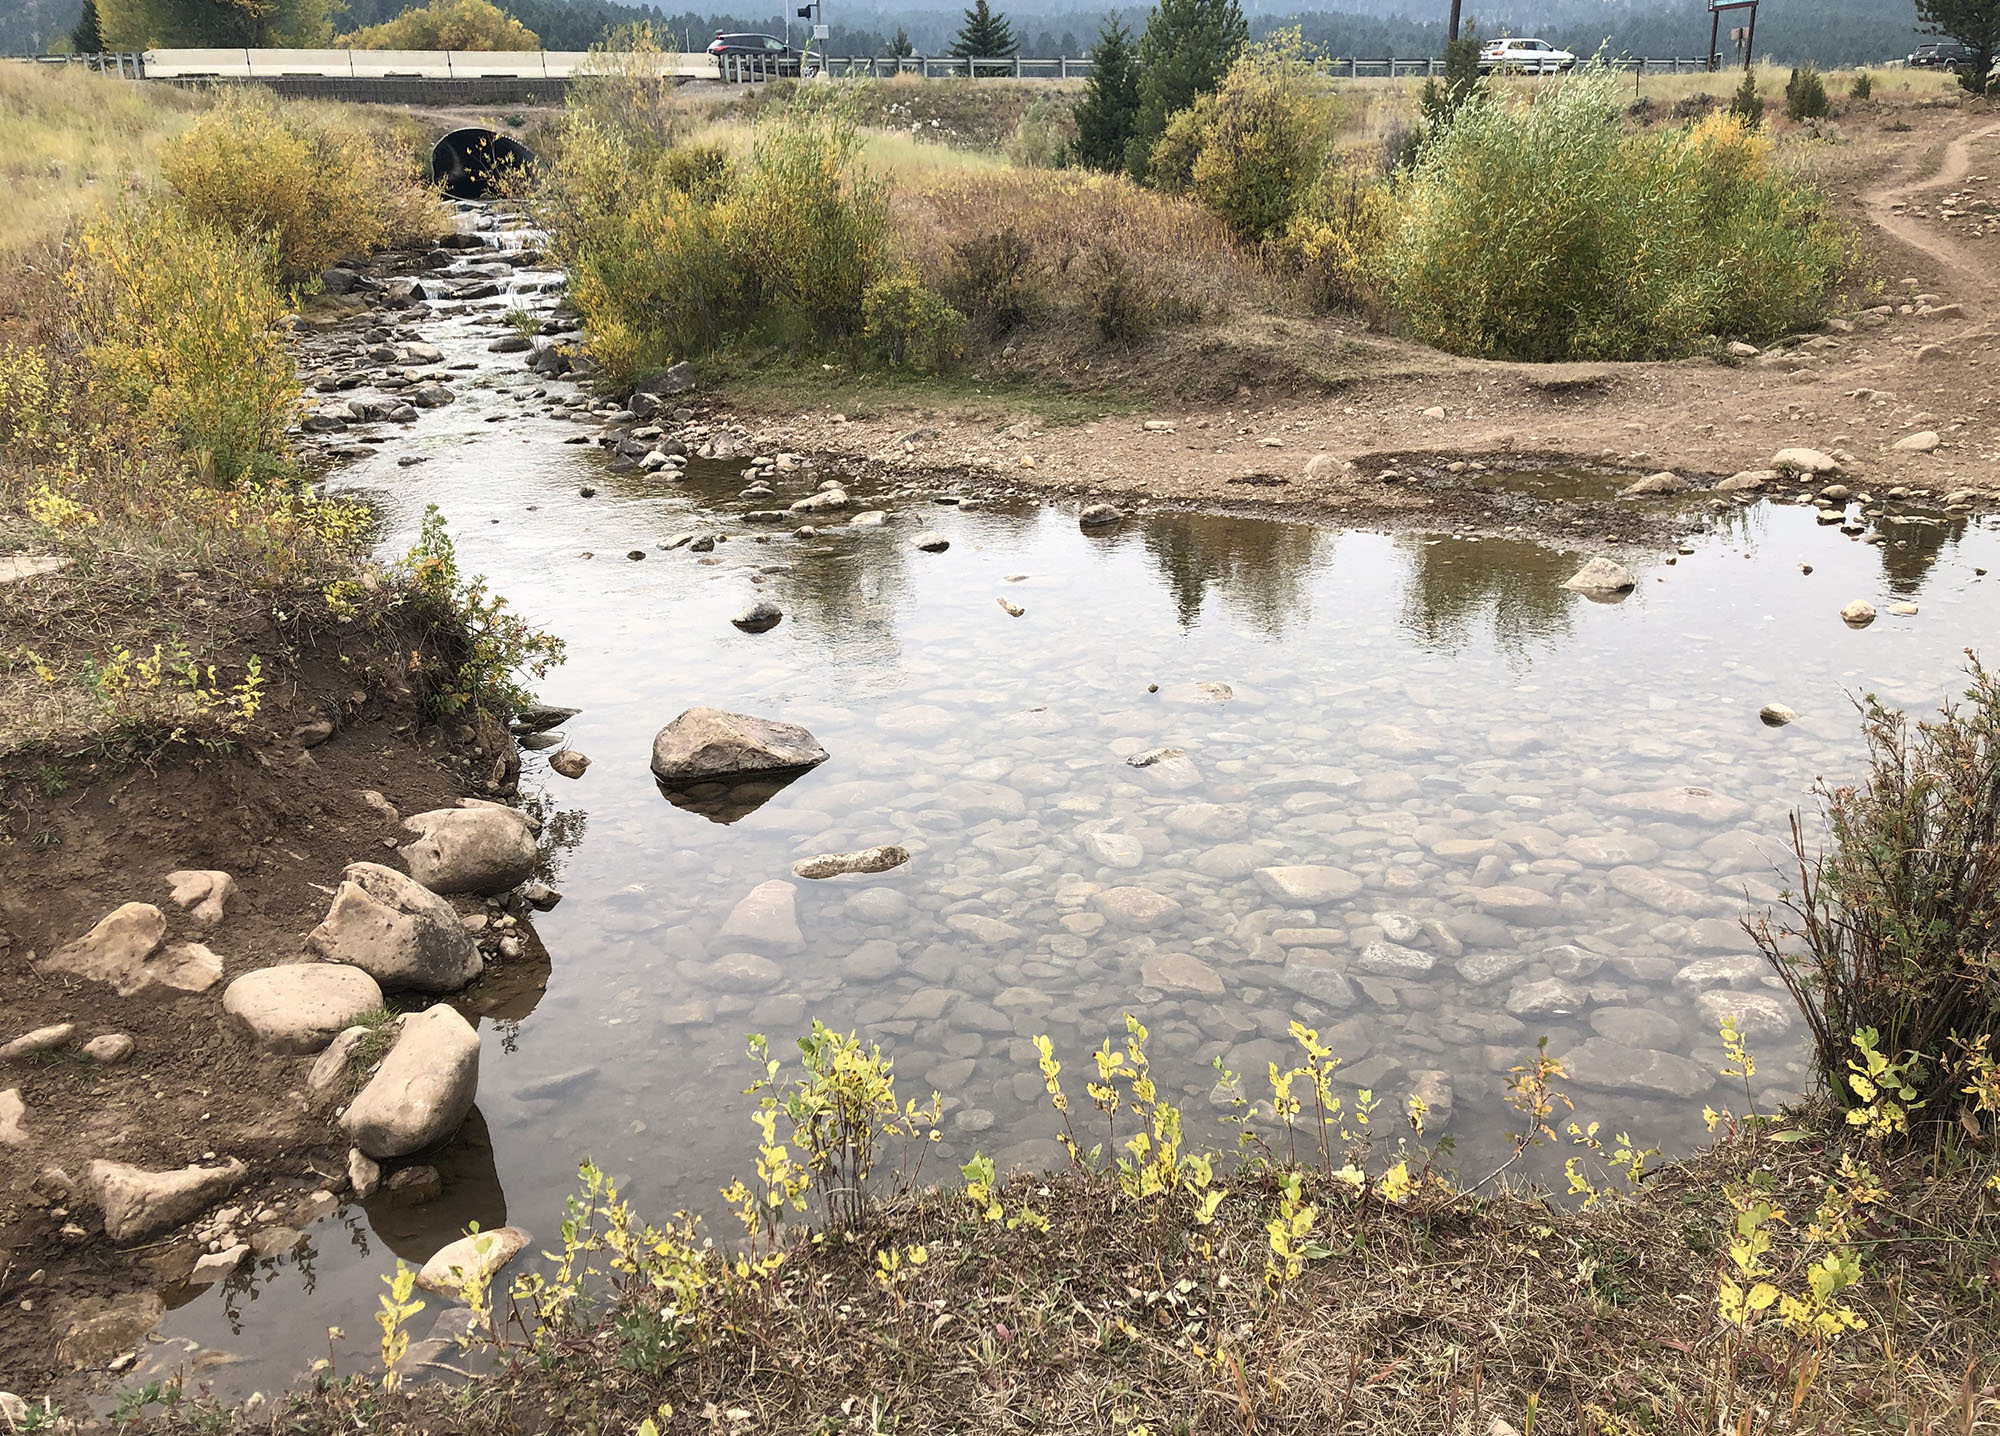 The culvert at the highway intersection is a fish barrier and the stream crossing is showing evidence of recreational use impacts including soil erosion, compaction, and damage to vegetation.